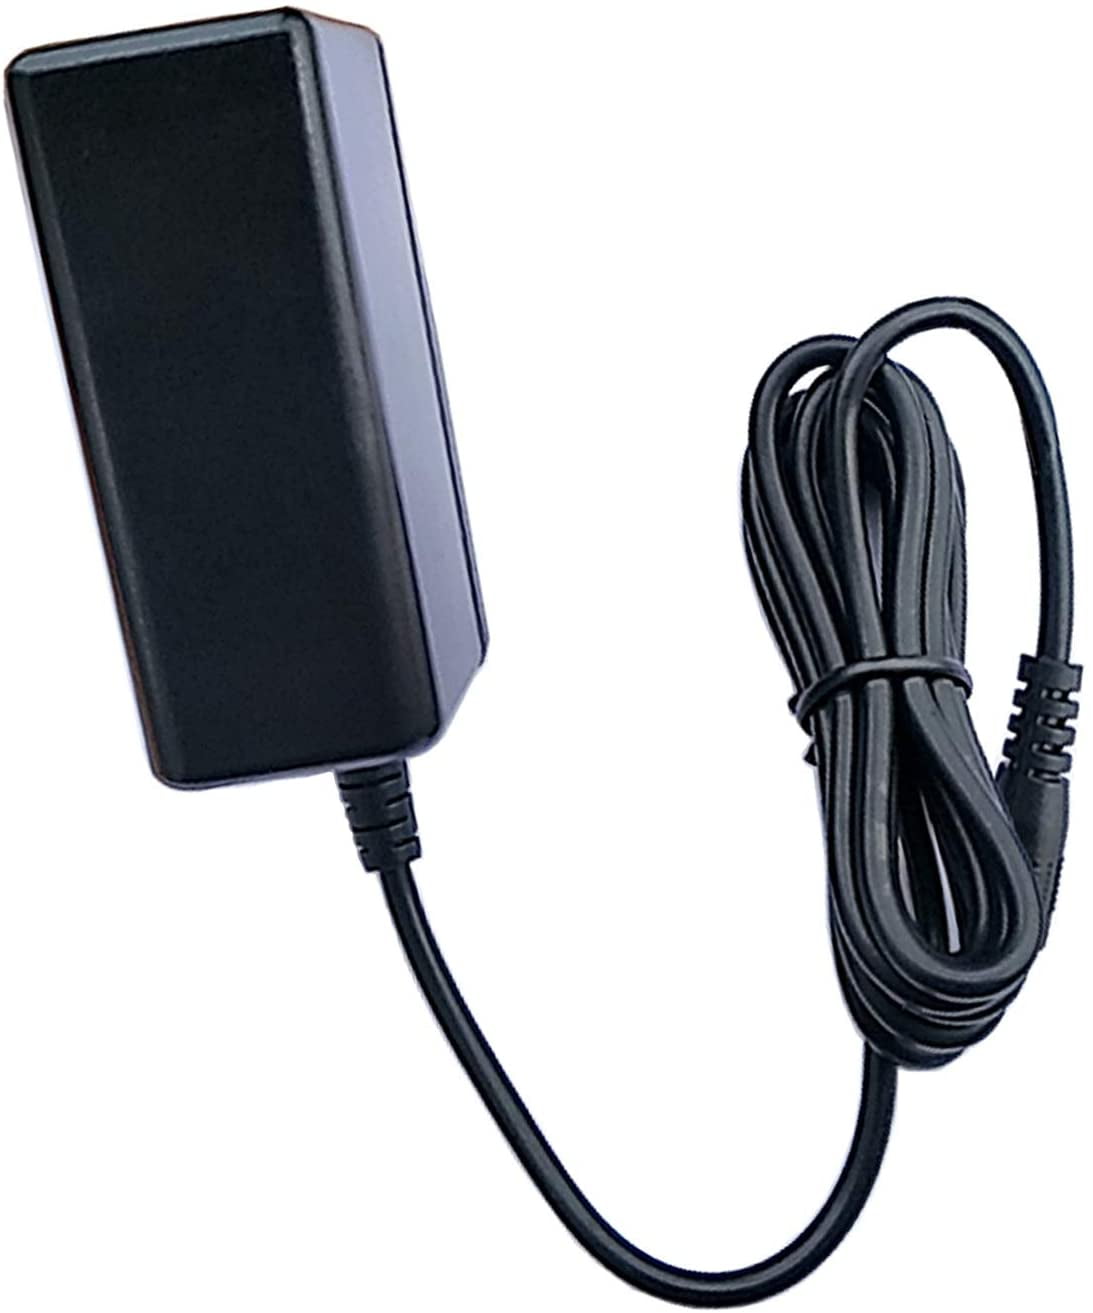 AC Power Adapter For Water Tech Pool Blaster Battery Charger U.S.A PART PBA099 